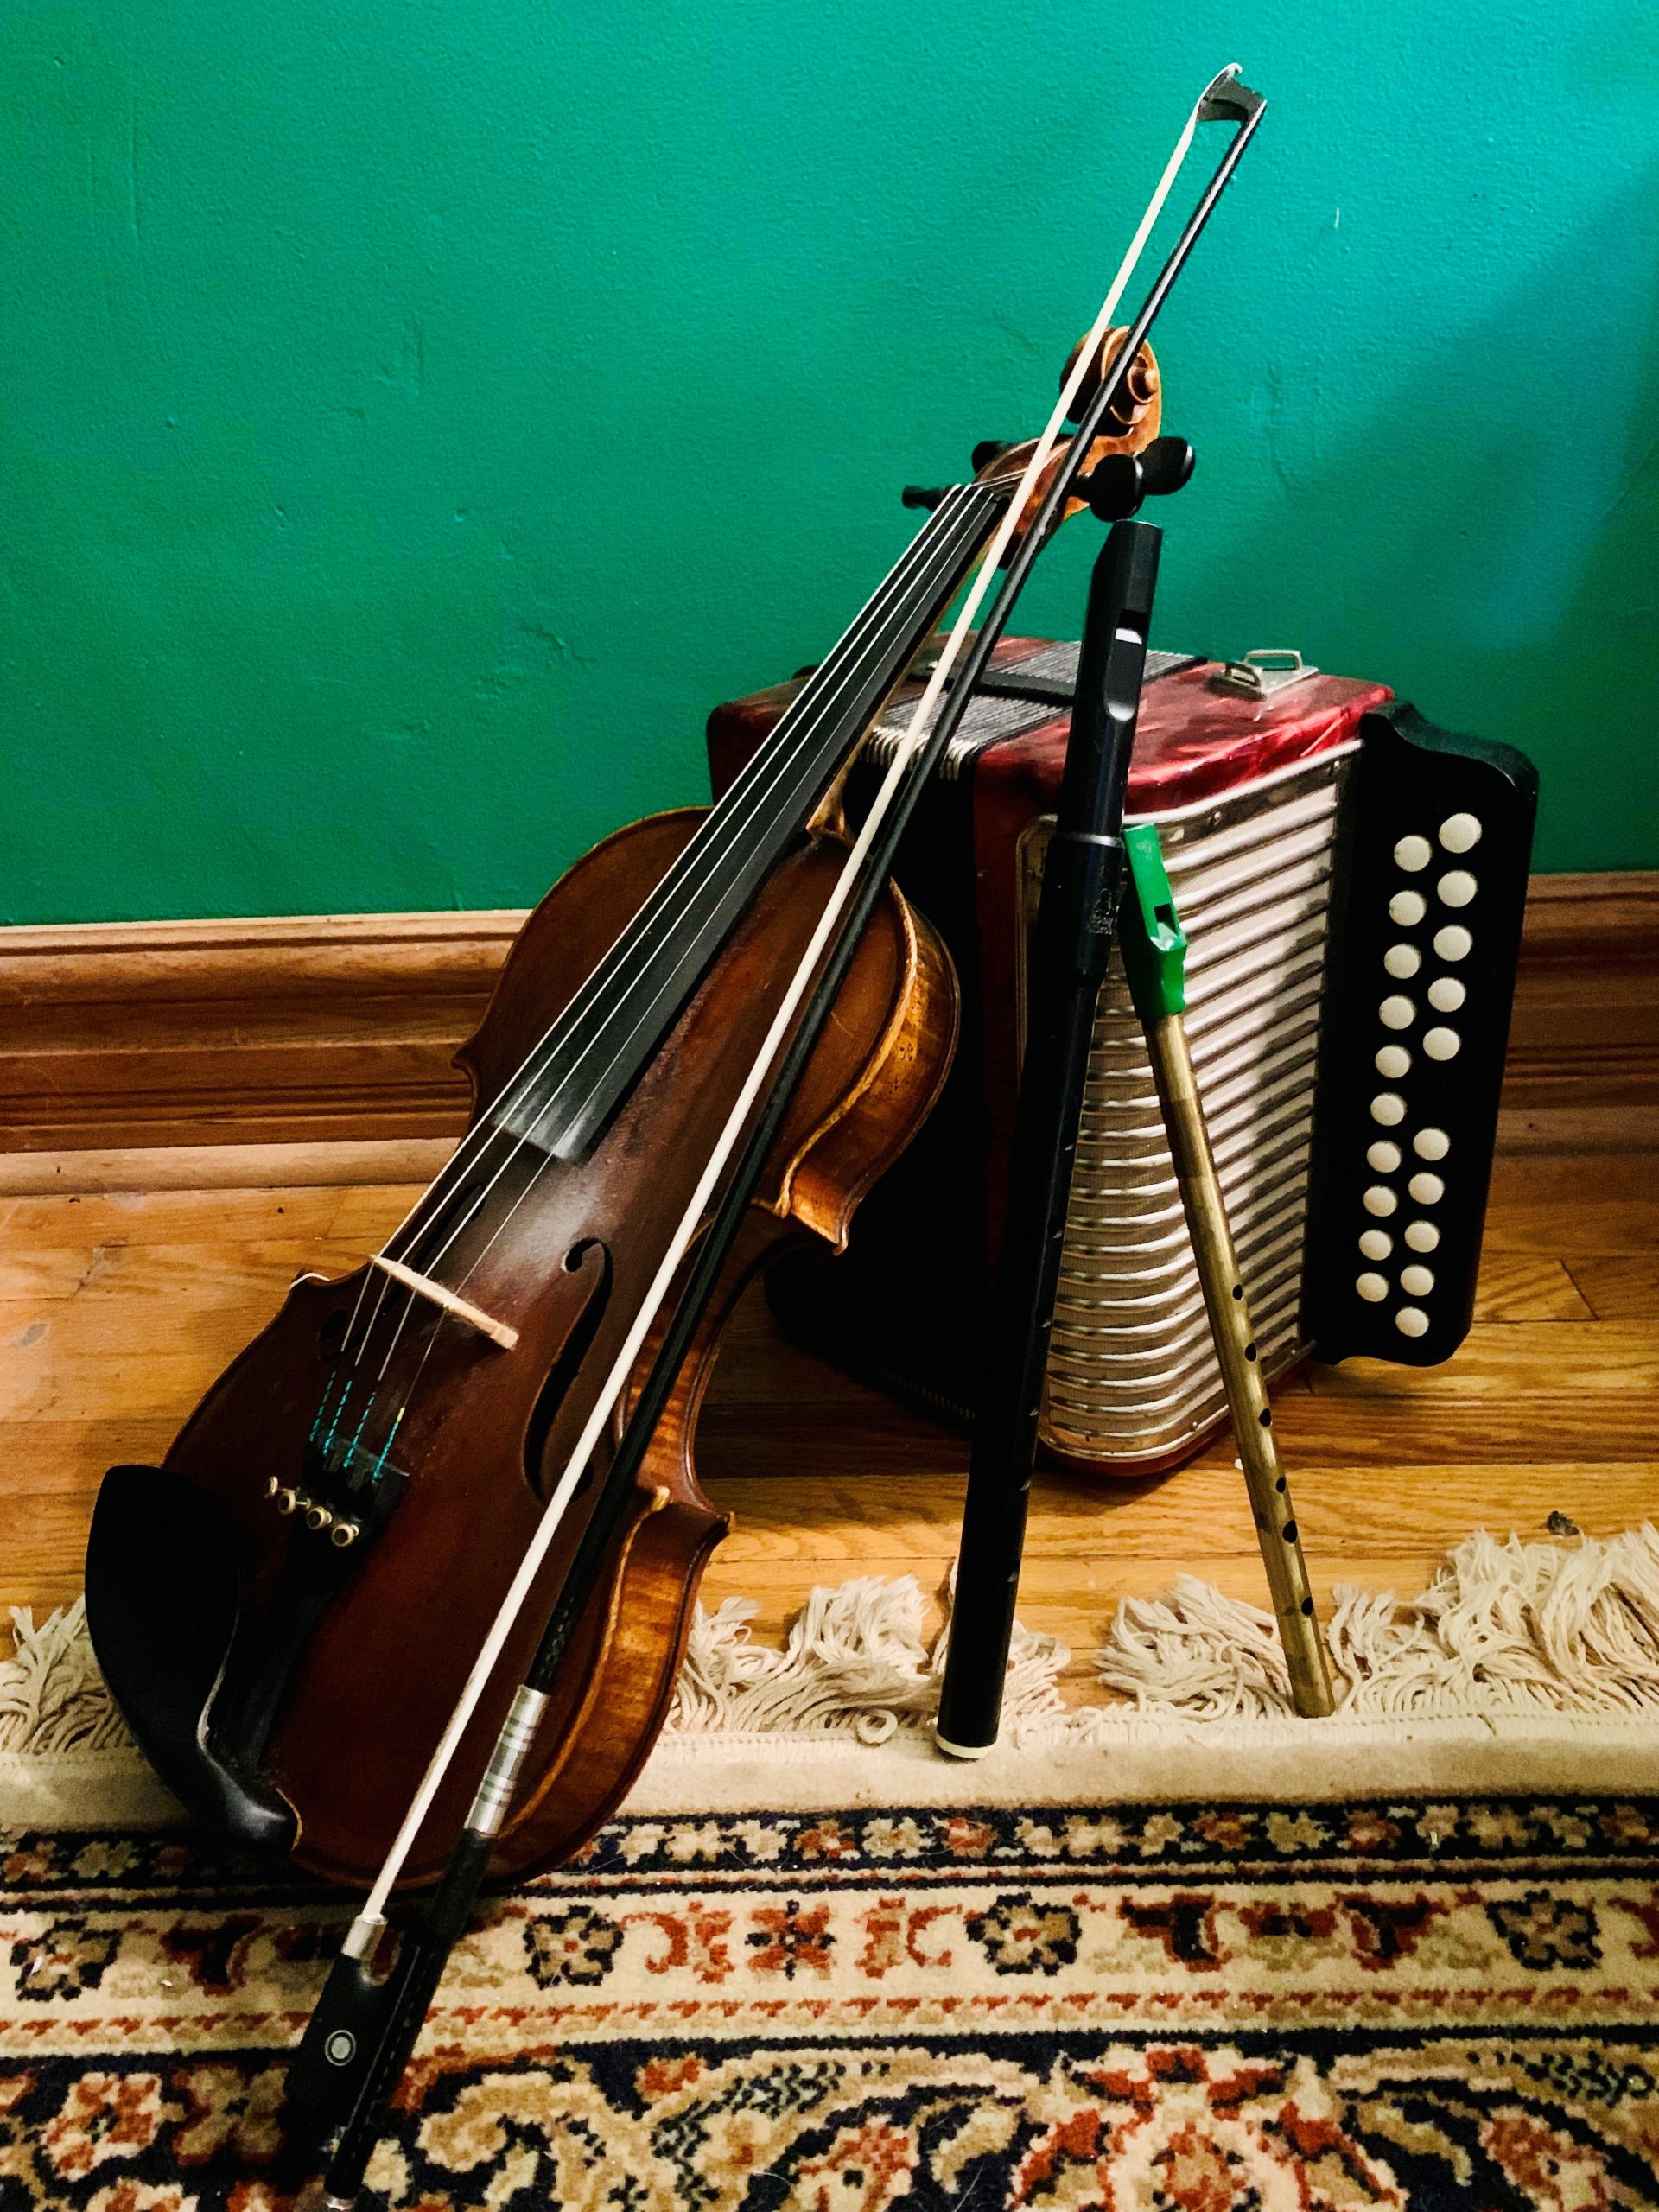 Fiddle leaning against accordion